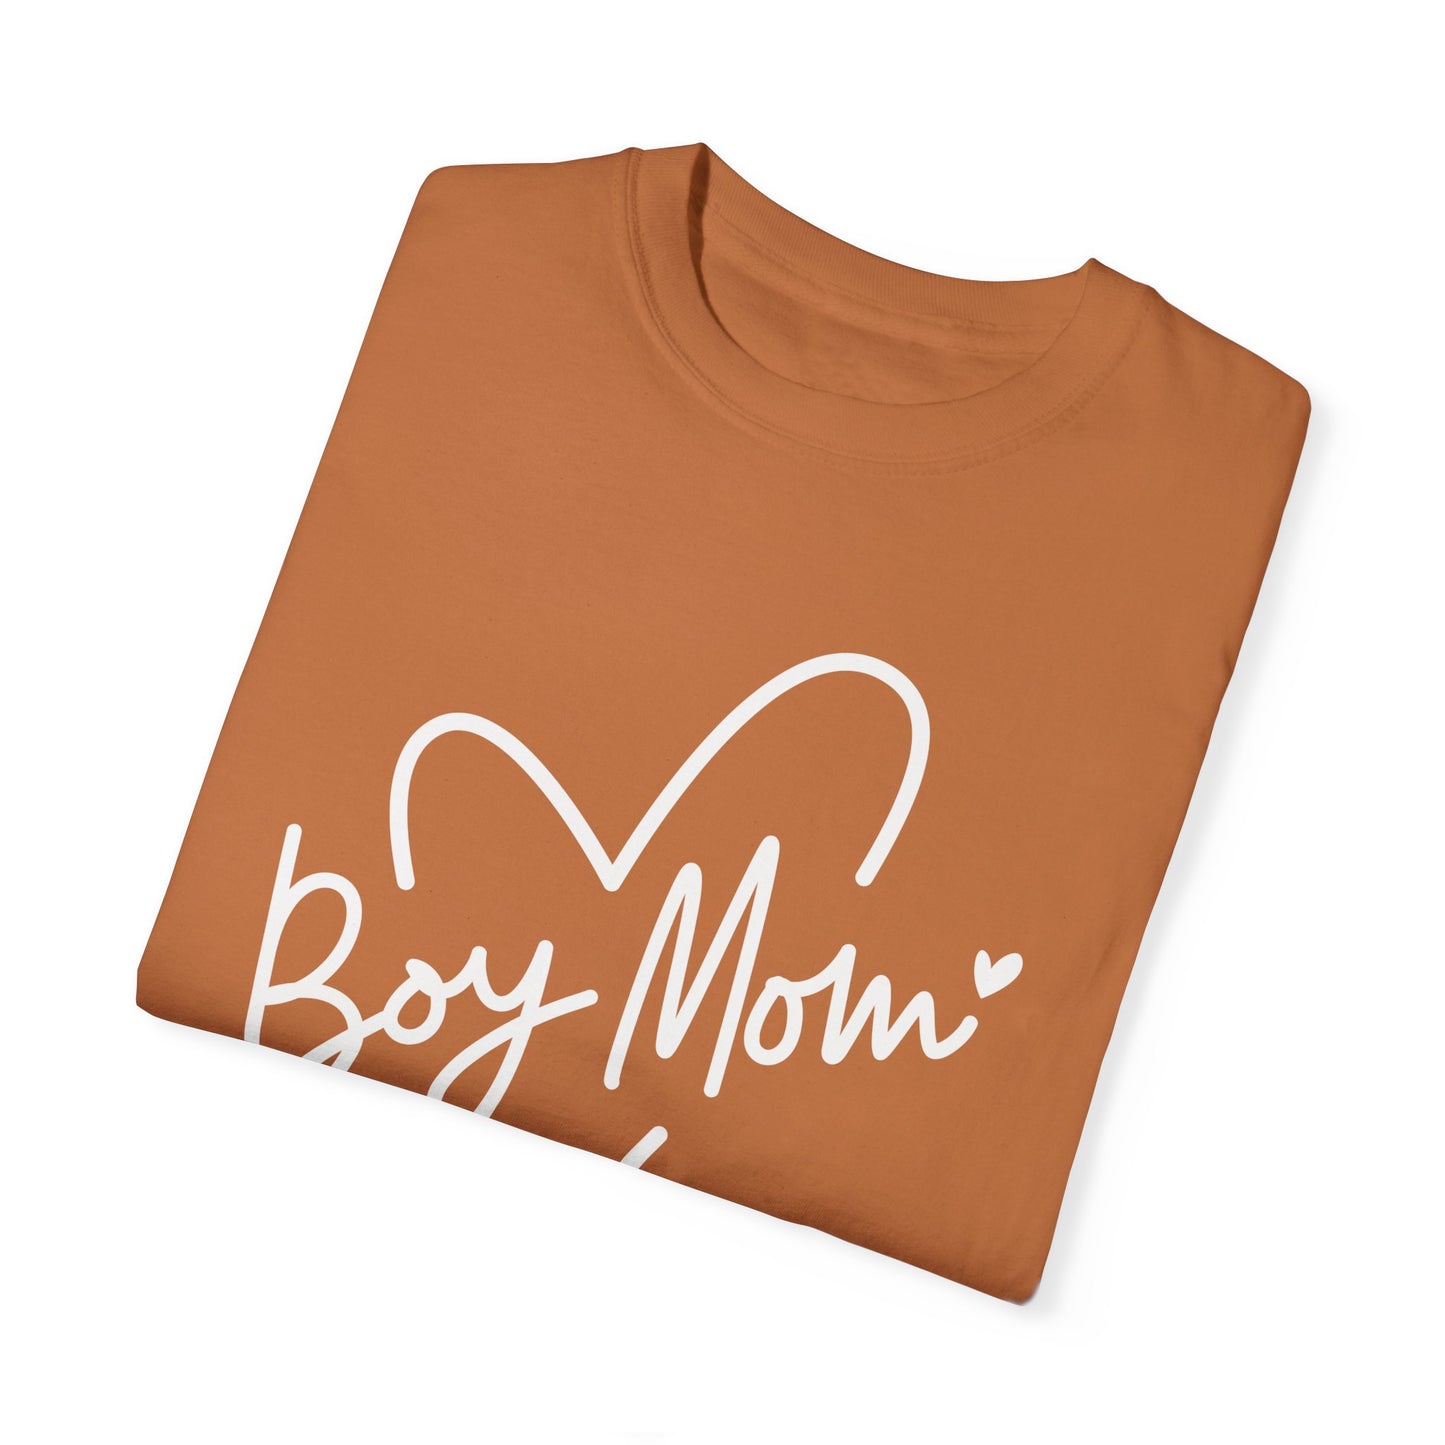 Casual boy mom tee with large heart print